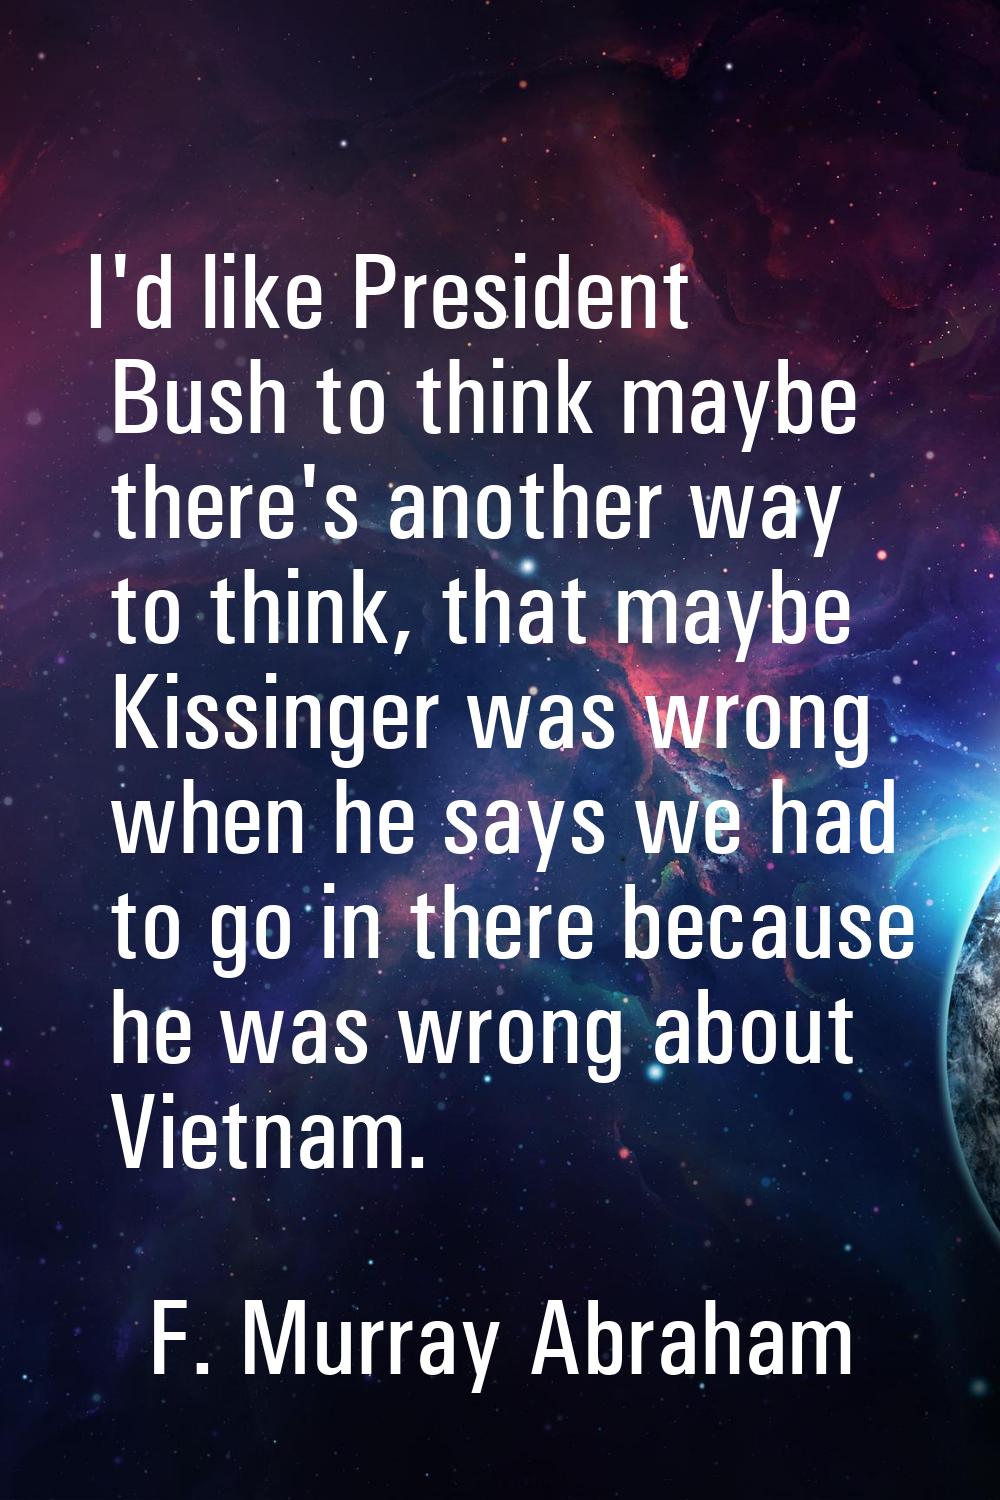 I'd like President Bush to think maybe there's another way to think, that maybe Kissinger was wrong